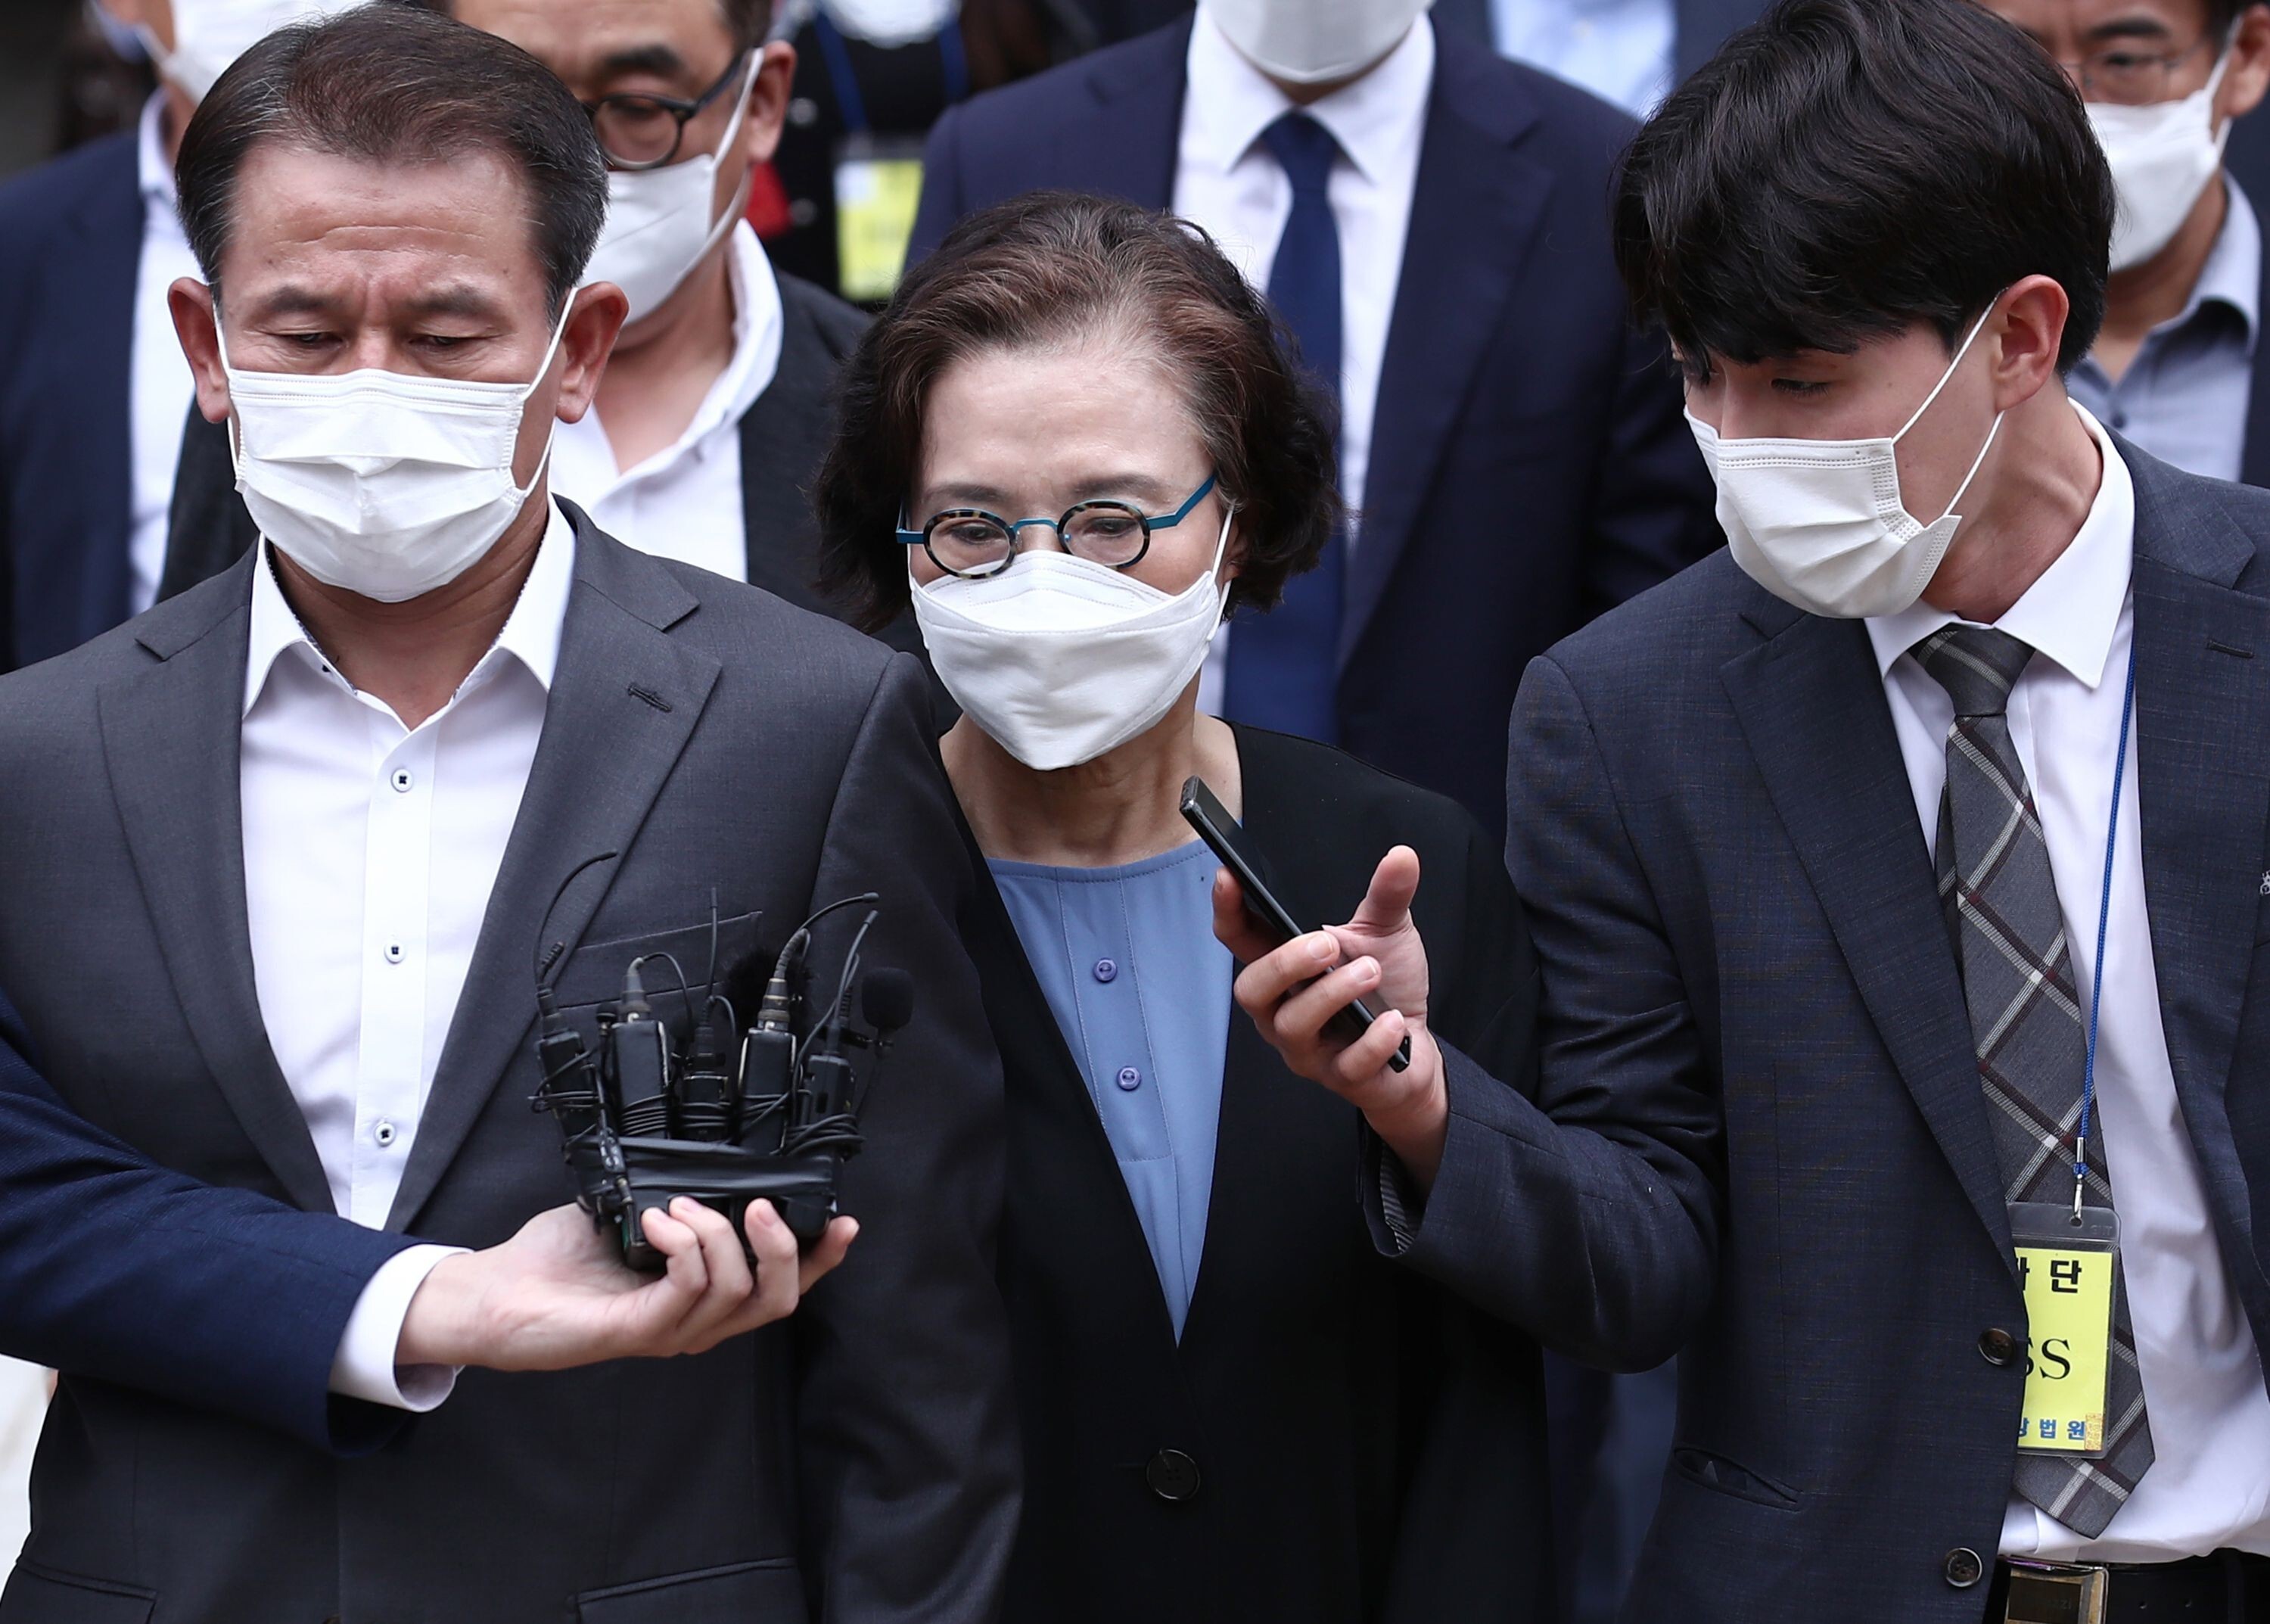 Lee Myung-hee (centre) leaves court after her trial in Seoul. Photo: Yonhap/AFP